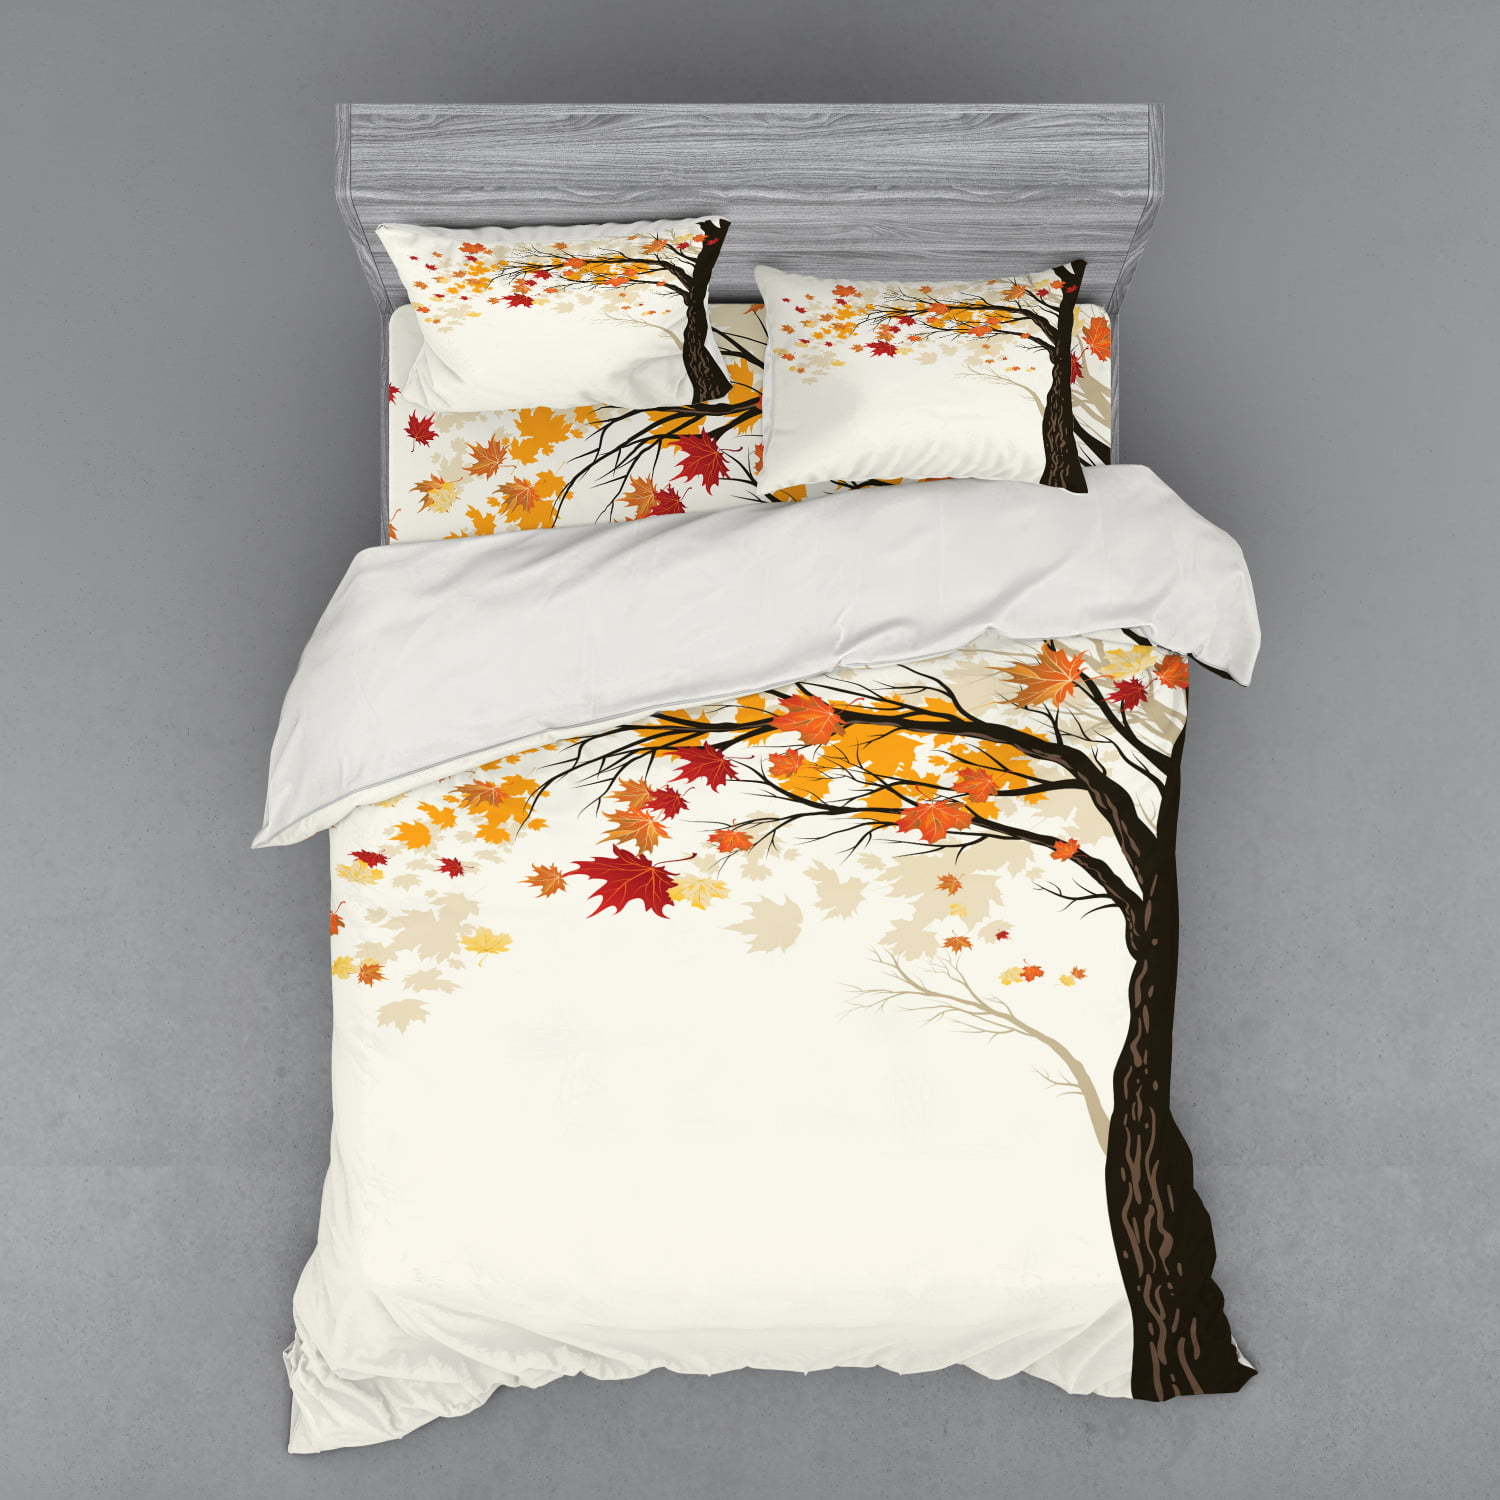 Autumn Duvet Cover Set, Colorful Foliage and Tree Silhouette Semtember ...